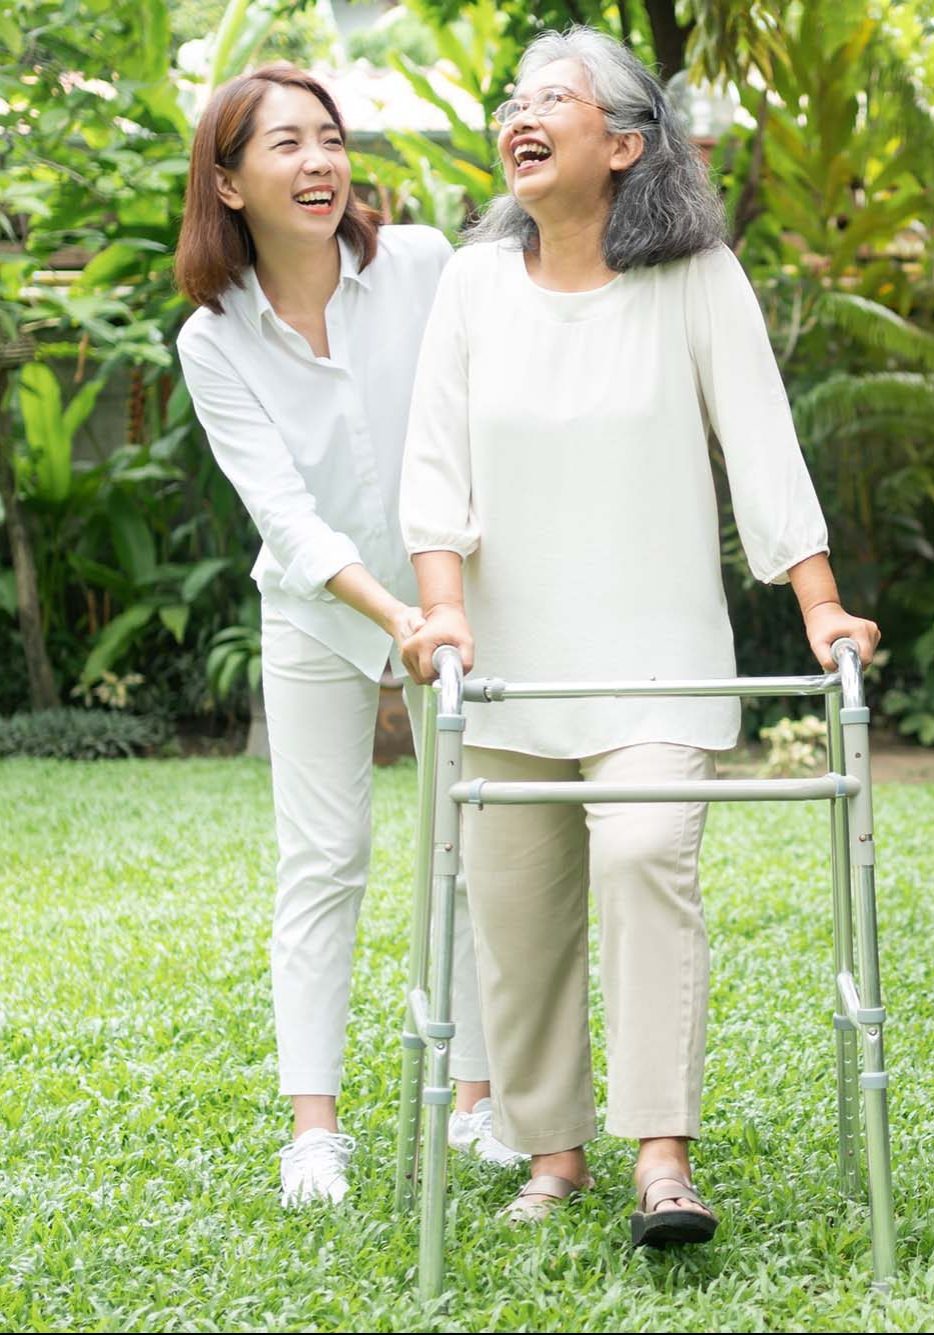 Smiling elderly woman and carer